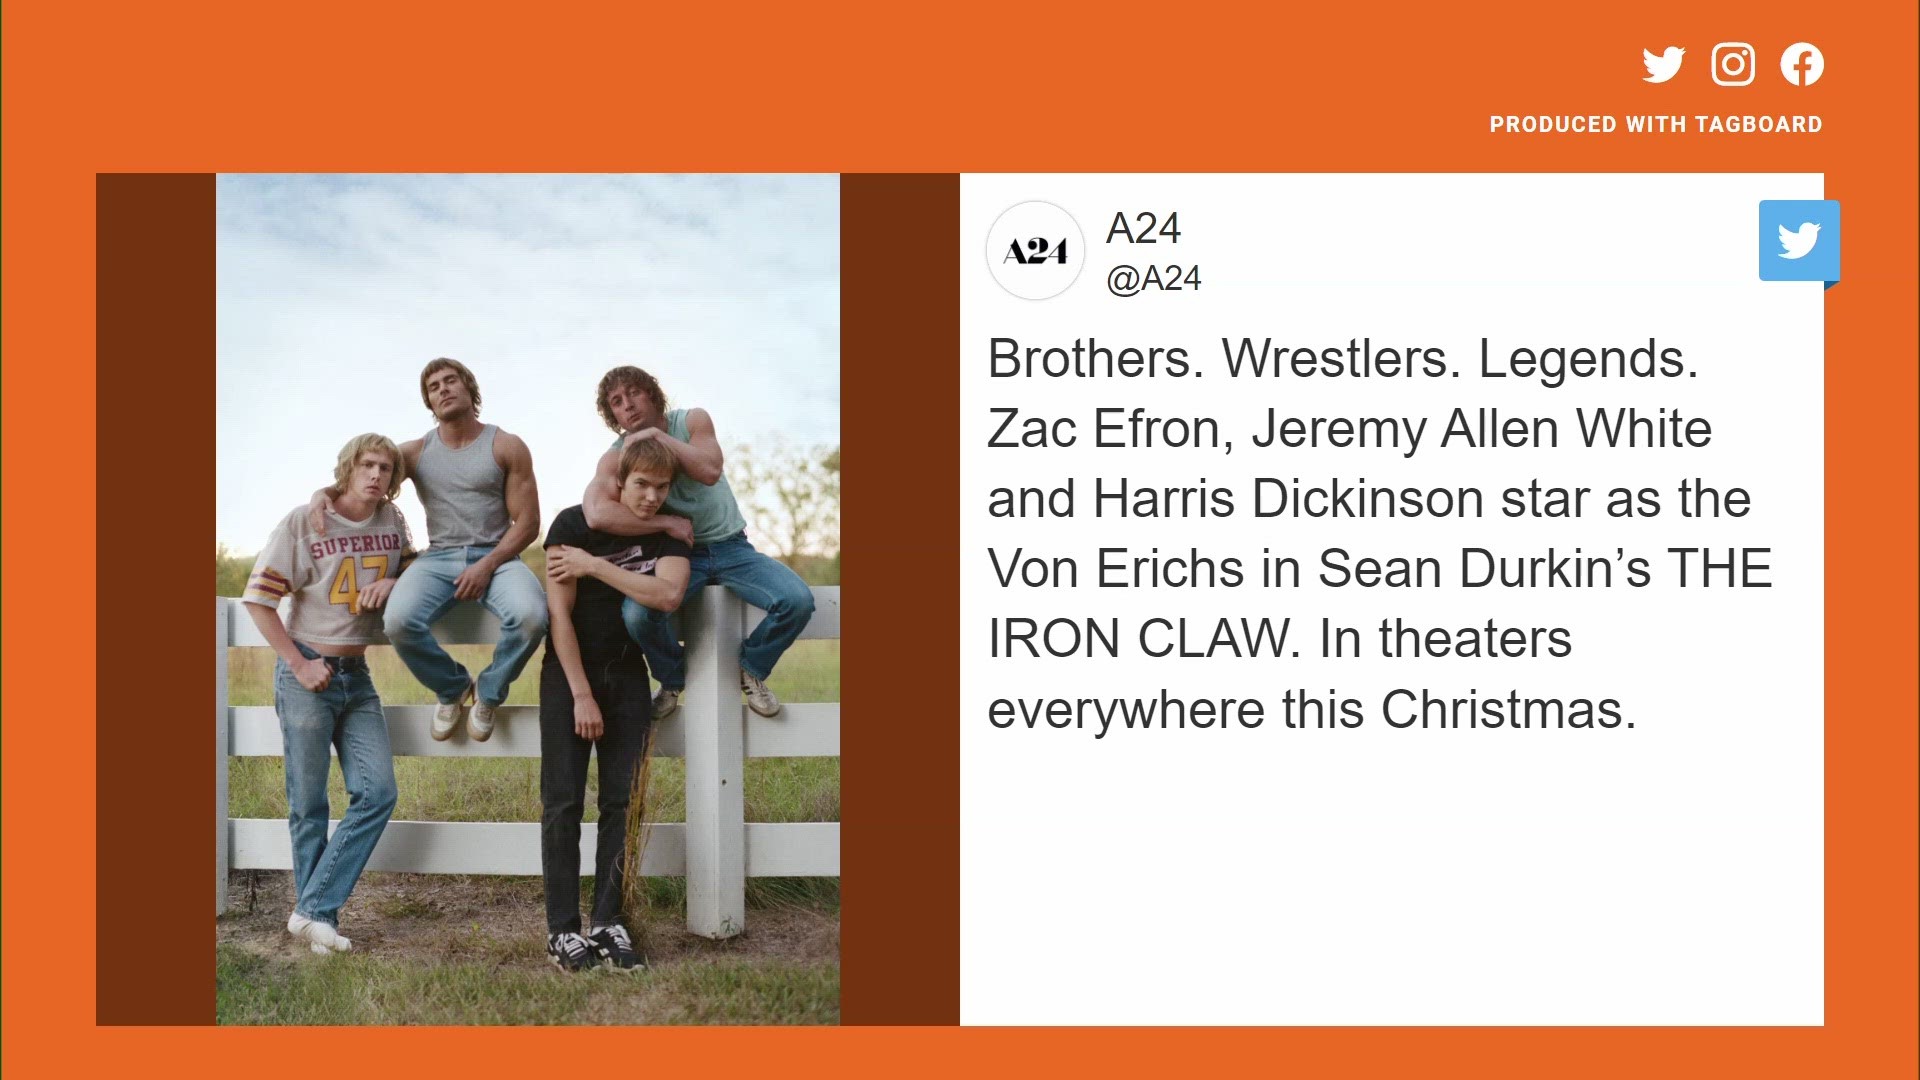 The movie will follow the rise and tragic fall of the Von Erichs, a North Texas-based wrestling family who achieved superstardom in the 1980s.